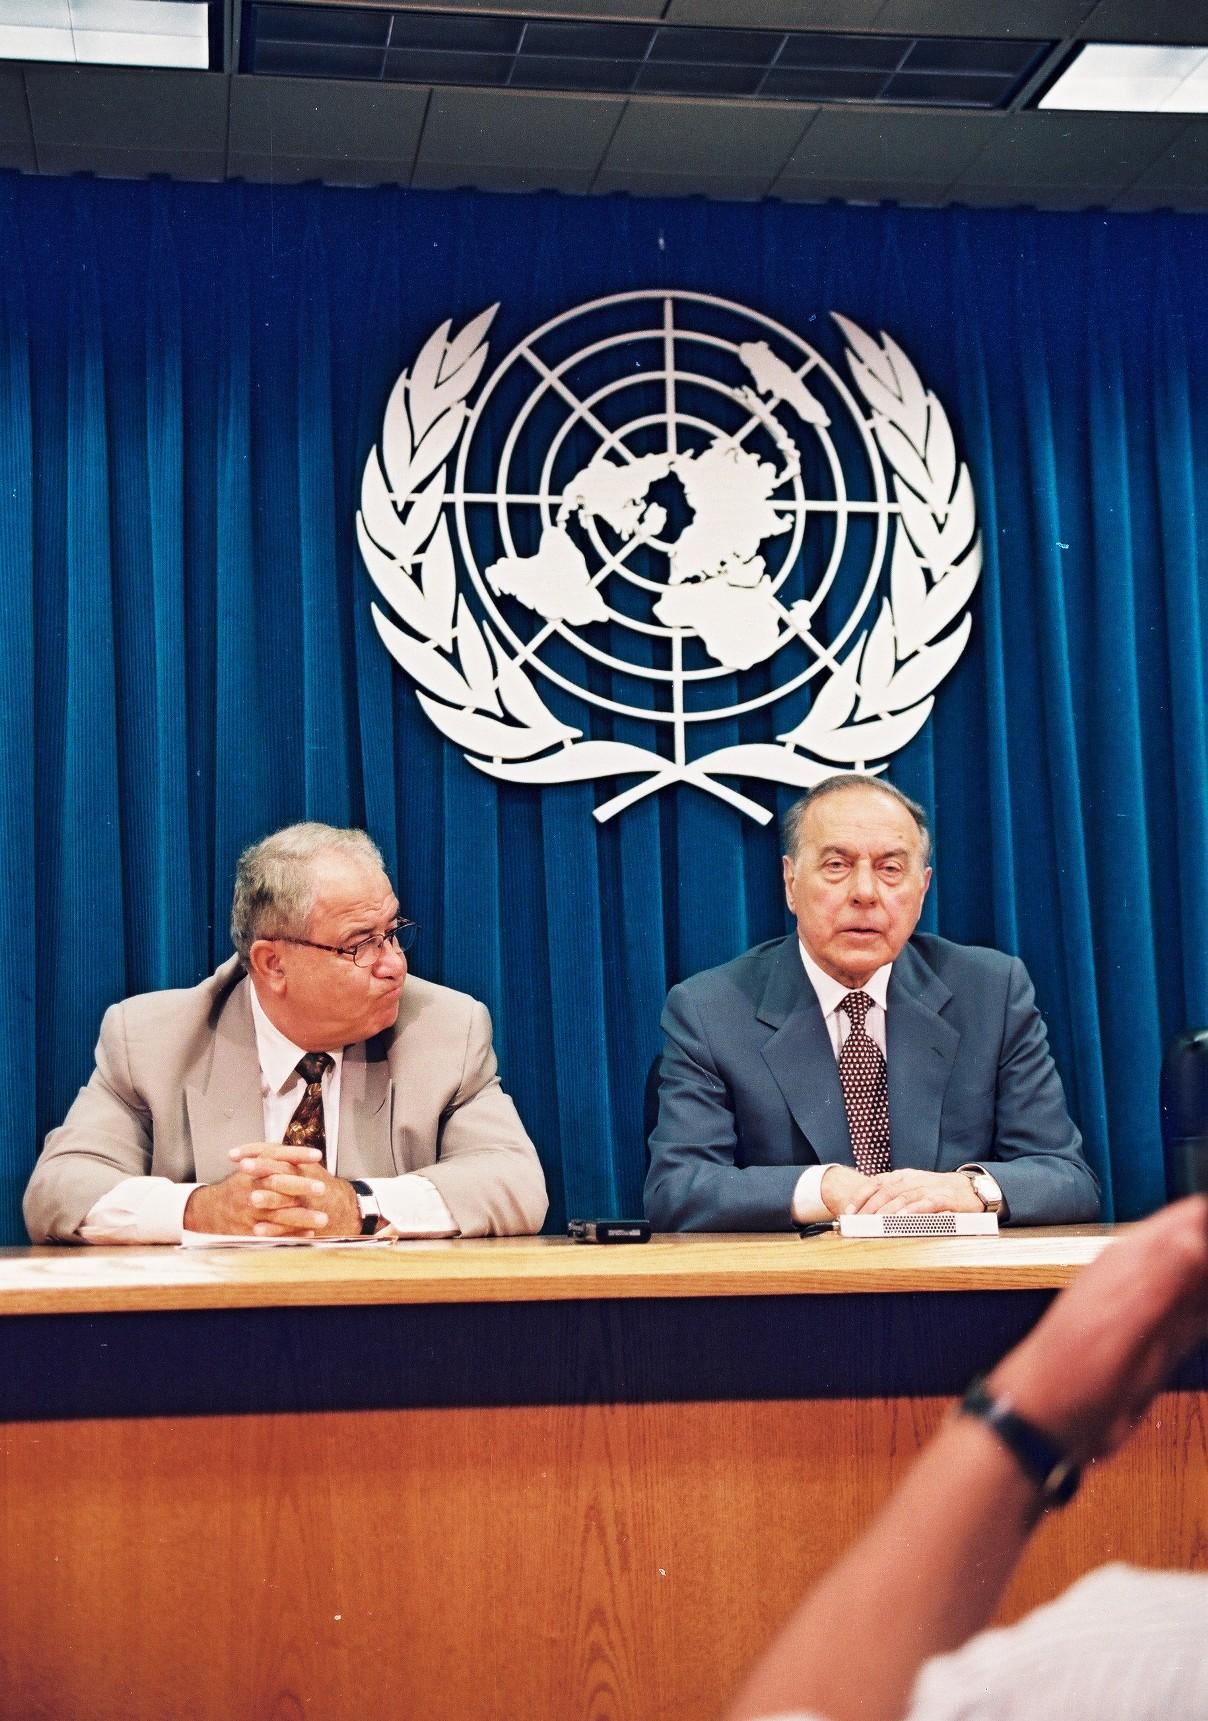 Statement of Heydar Aliyev, President of the Republic of Azerbaijan at the press conference with ‎foreign correspondents accredited at the United Nations - July 28, 1997‎